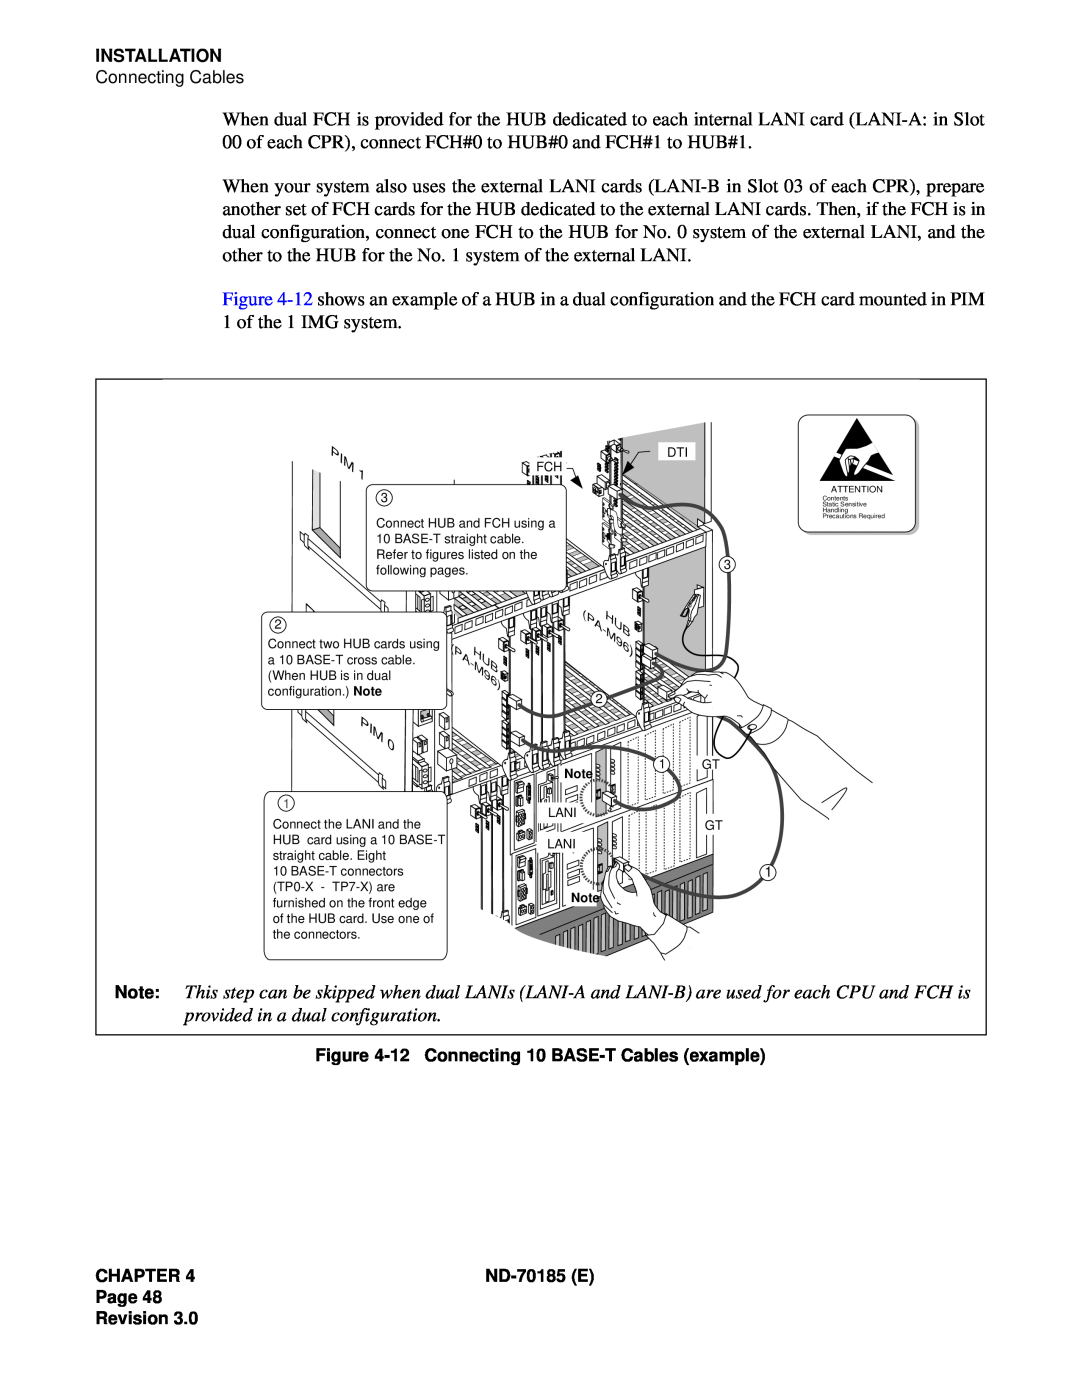 NEC NEAX2400 system manual Installation, 12Connecting 10 BASE-TCables example, Chapter, ND-70185E, Page Revision 